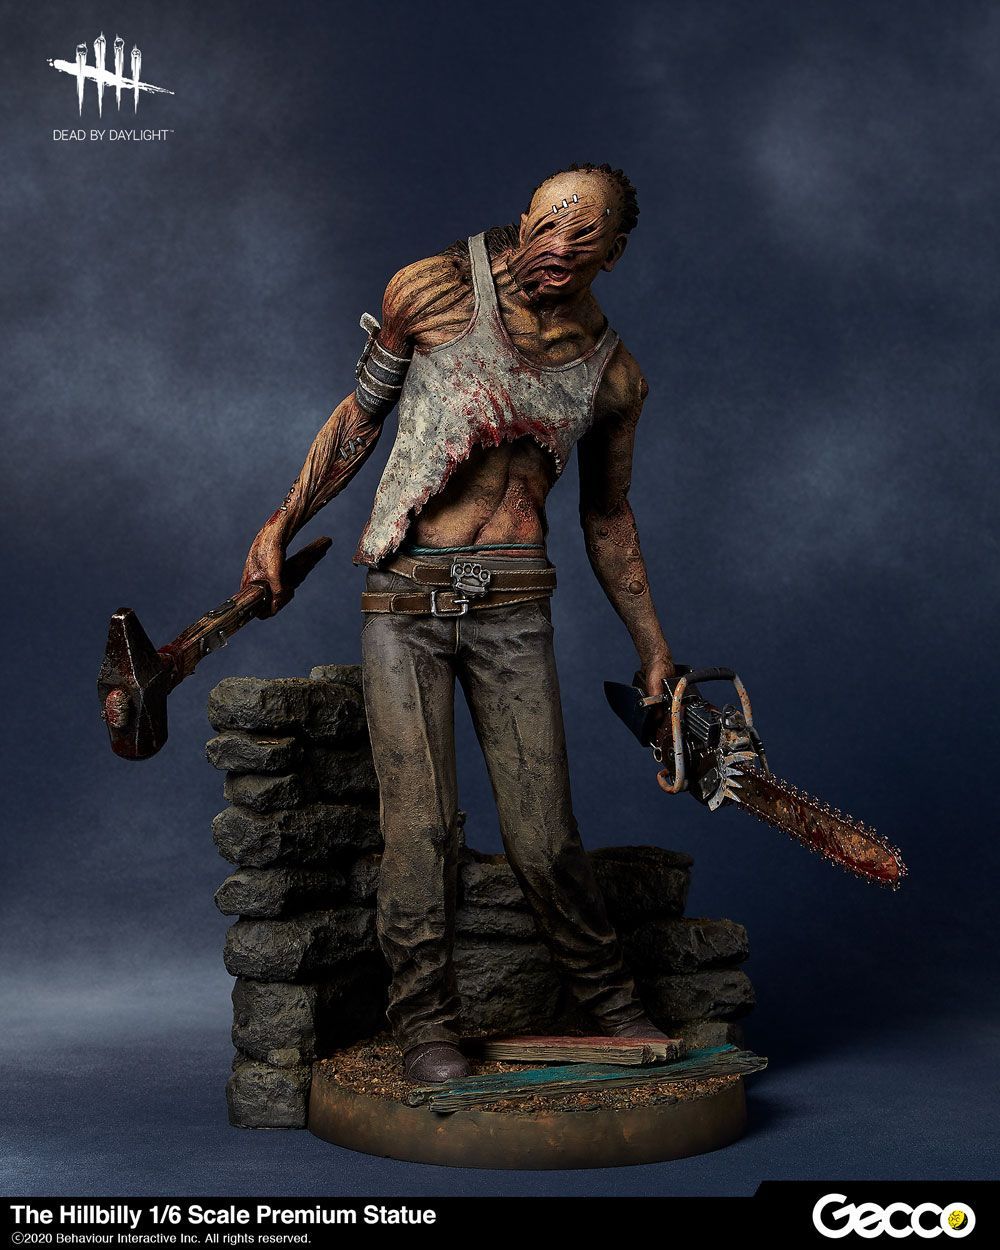 Dead by Daylight PVC Statue 1/6 The Hillbilly 31 cm Gecco